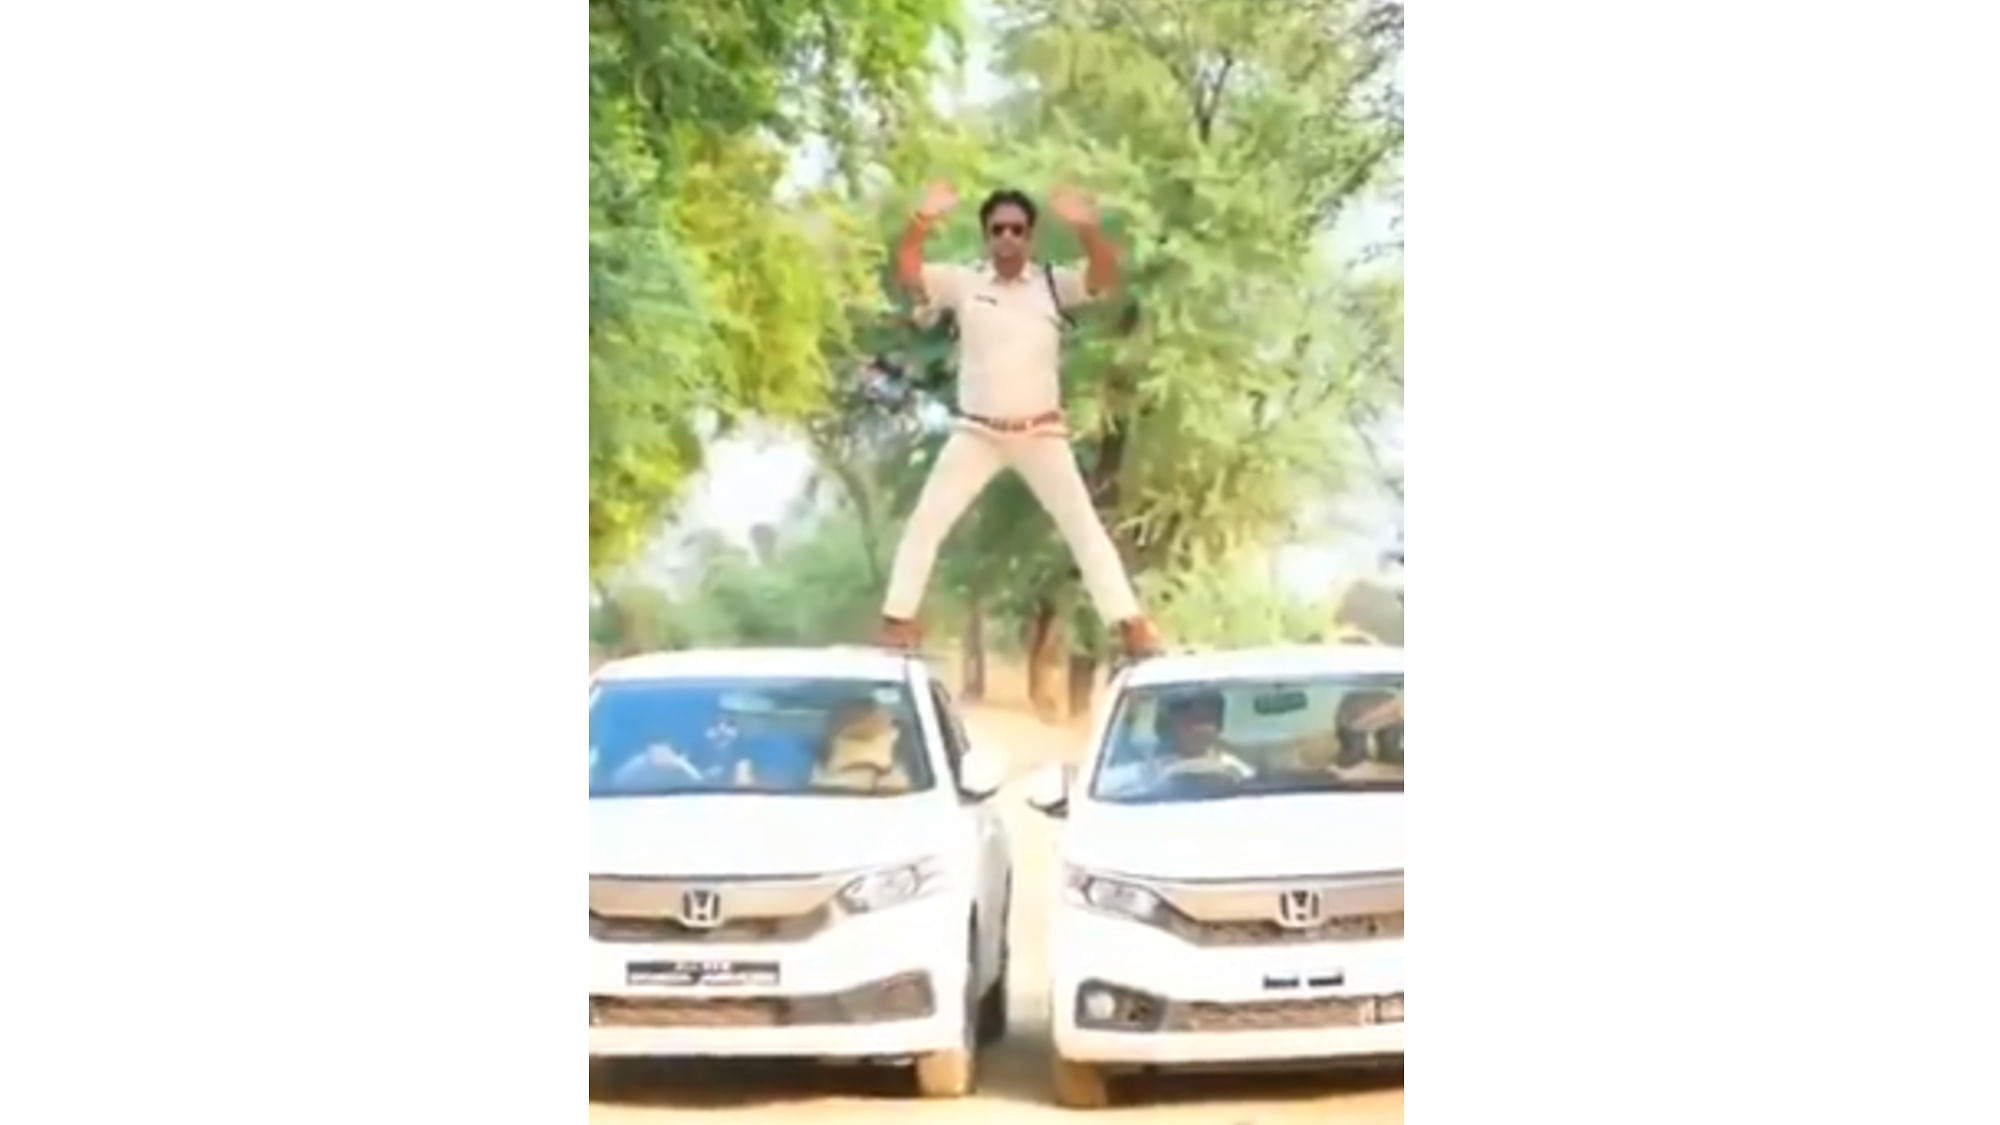 Manoj Yadav, the in-charge of Narsinghgarh police post in Damoh district performs a daredevil act of balancing himself on two moving cars. (Twitter video screengrab)